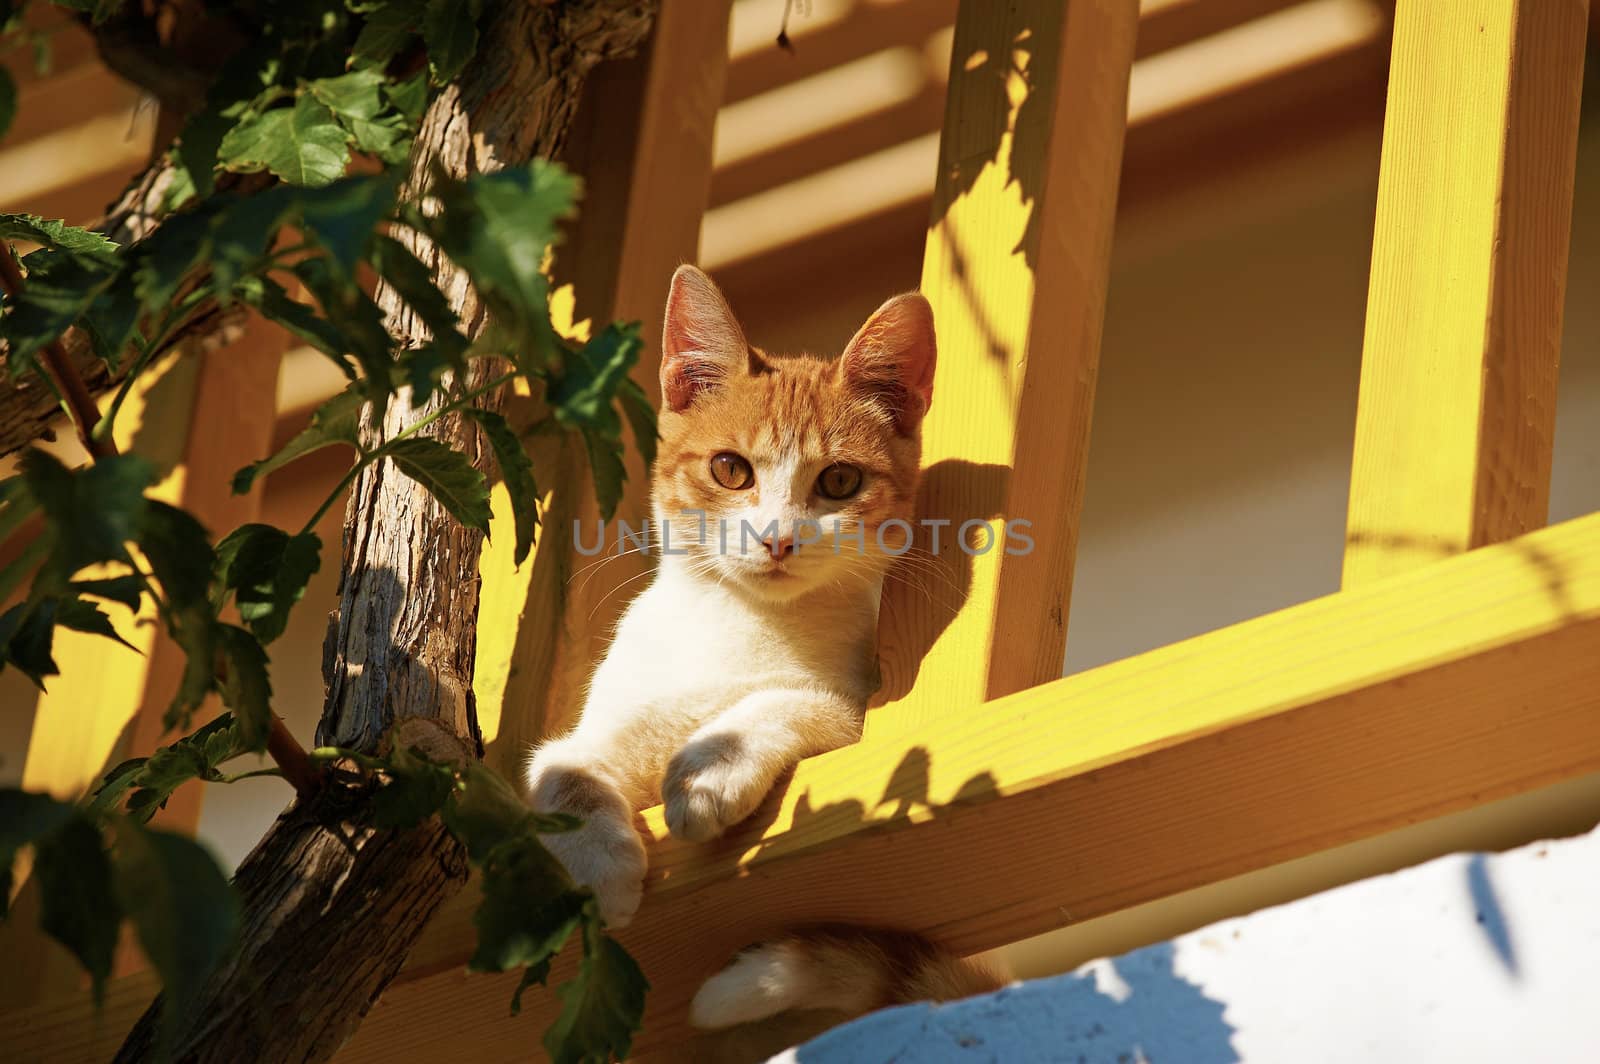  The cat lies on a balcony and looks to camera